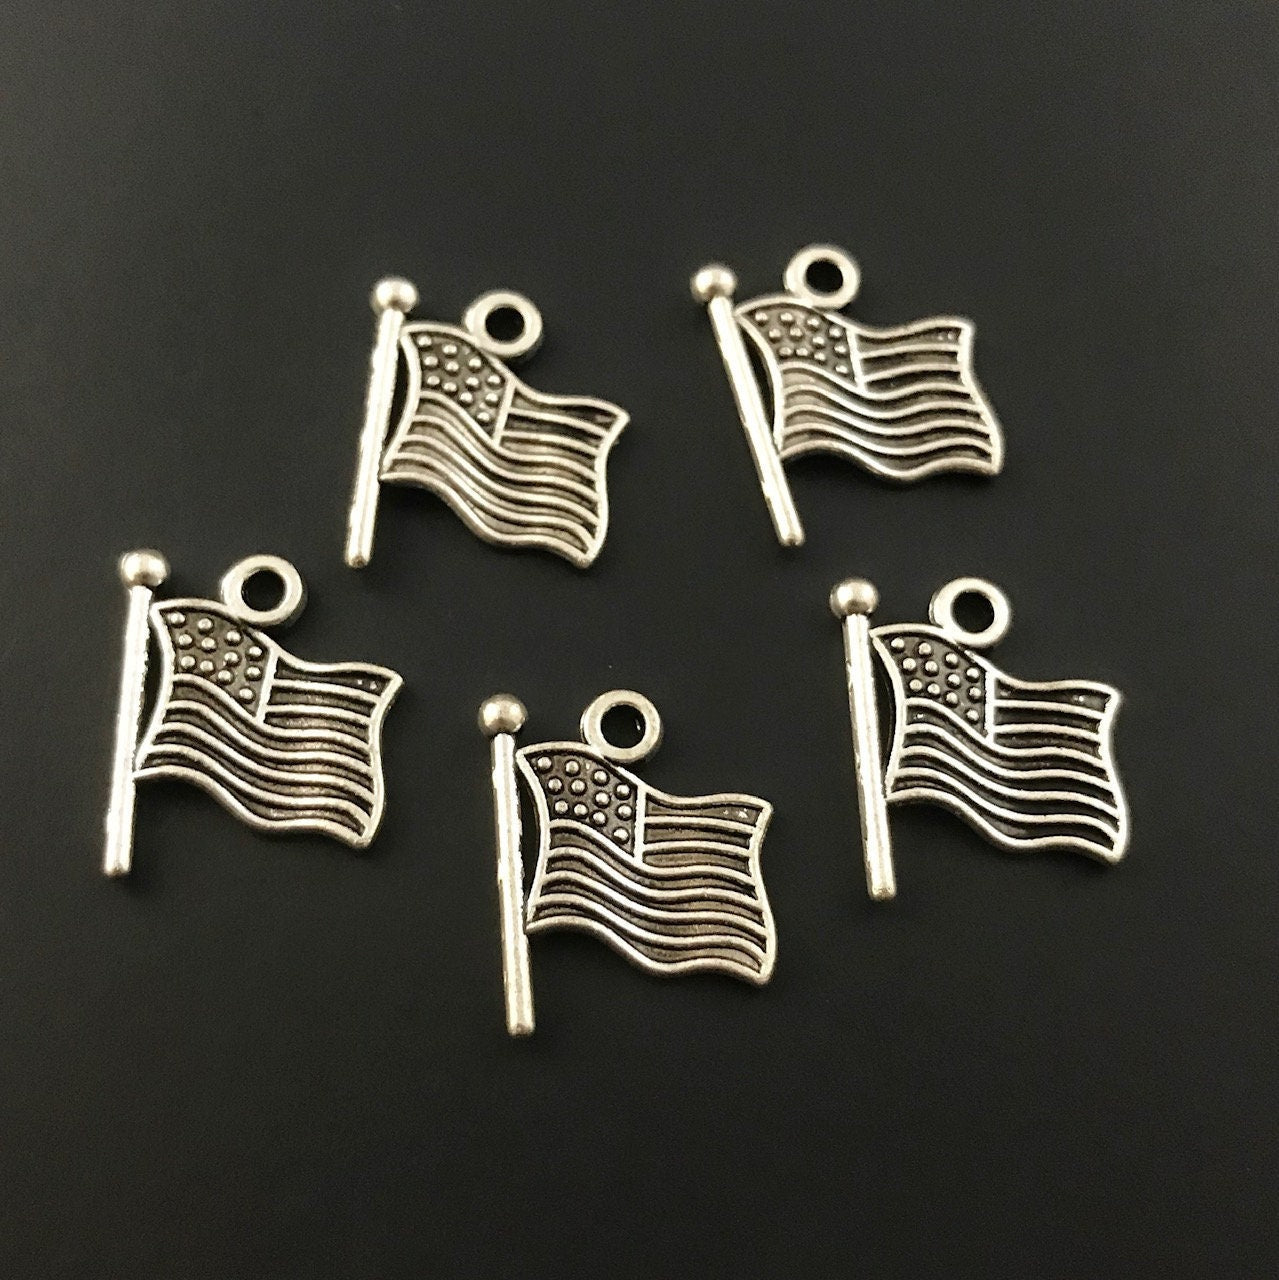 20 American Flag Charms - Antique Silver